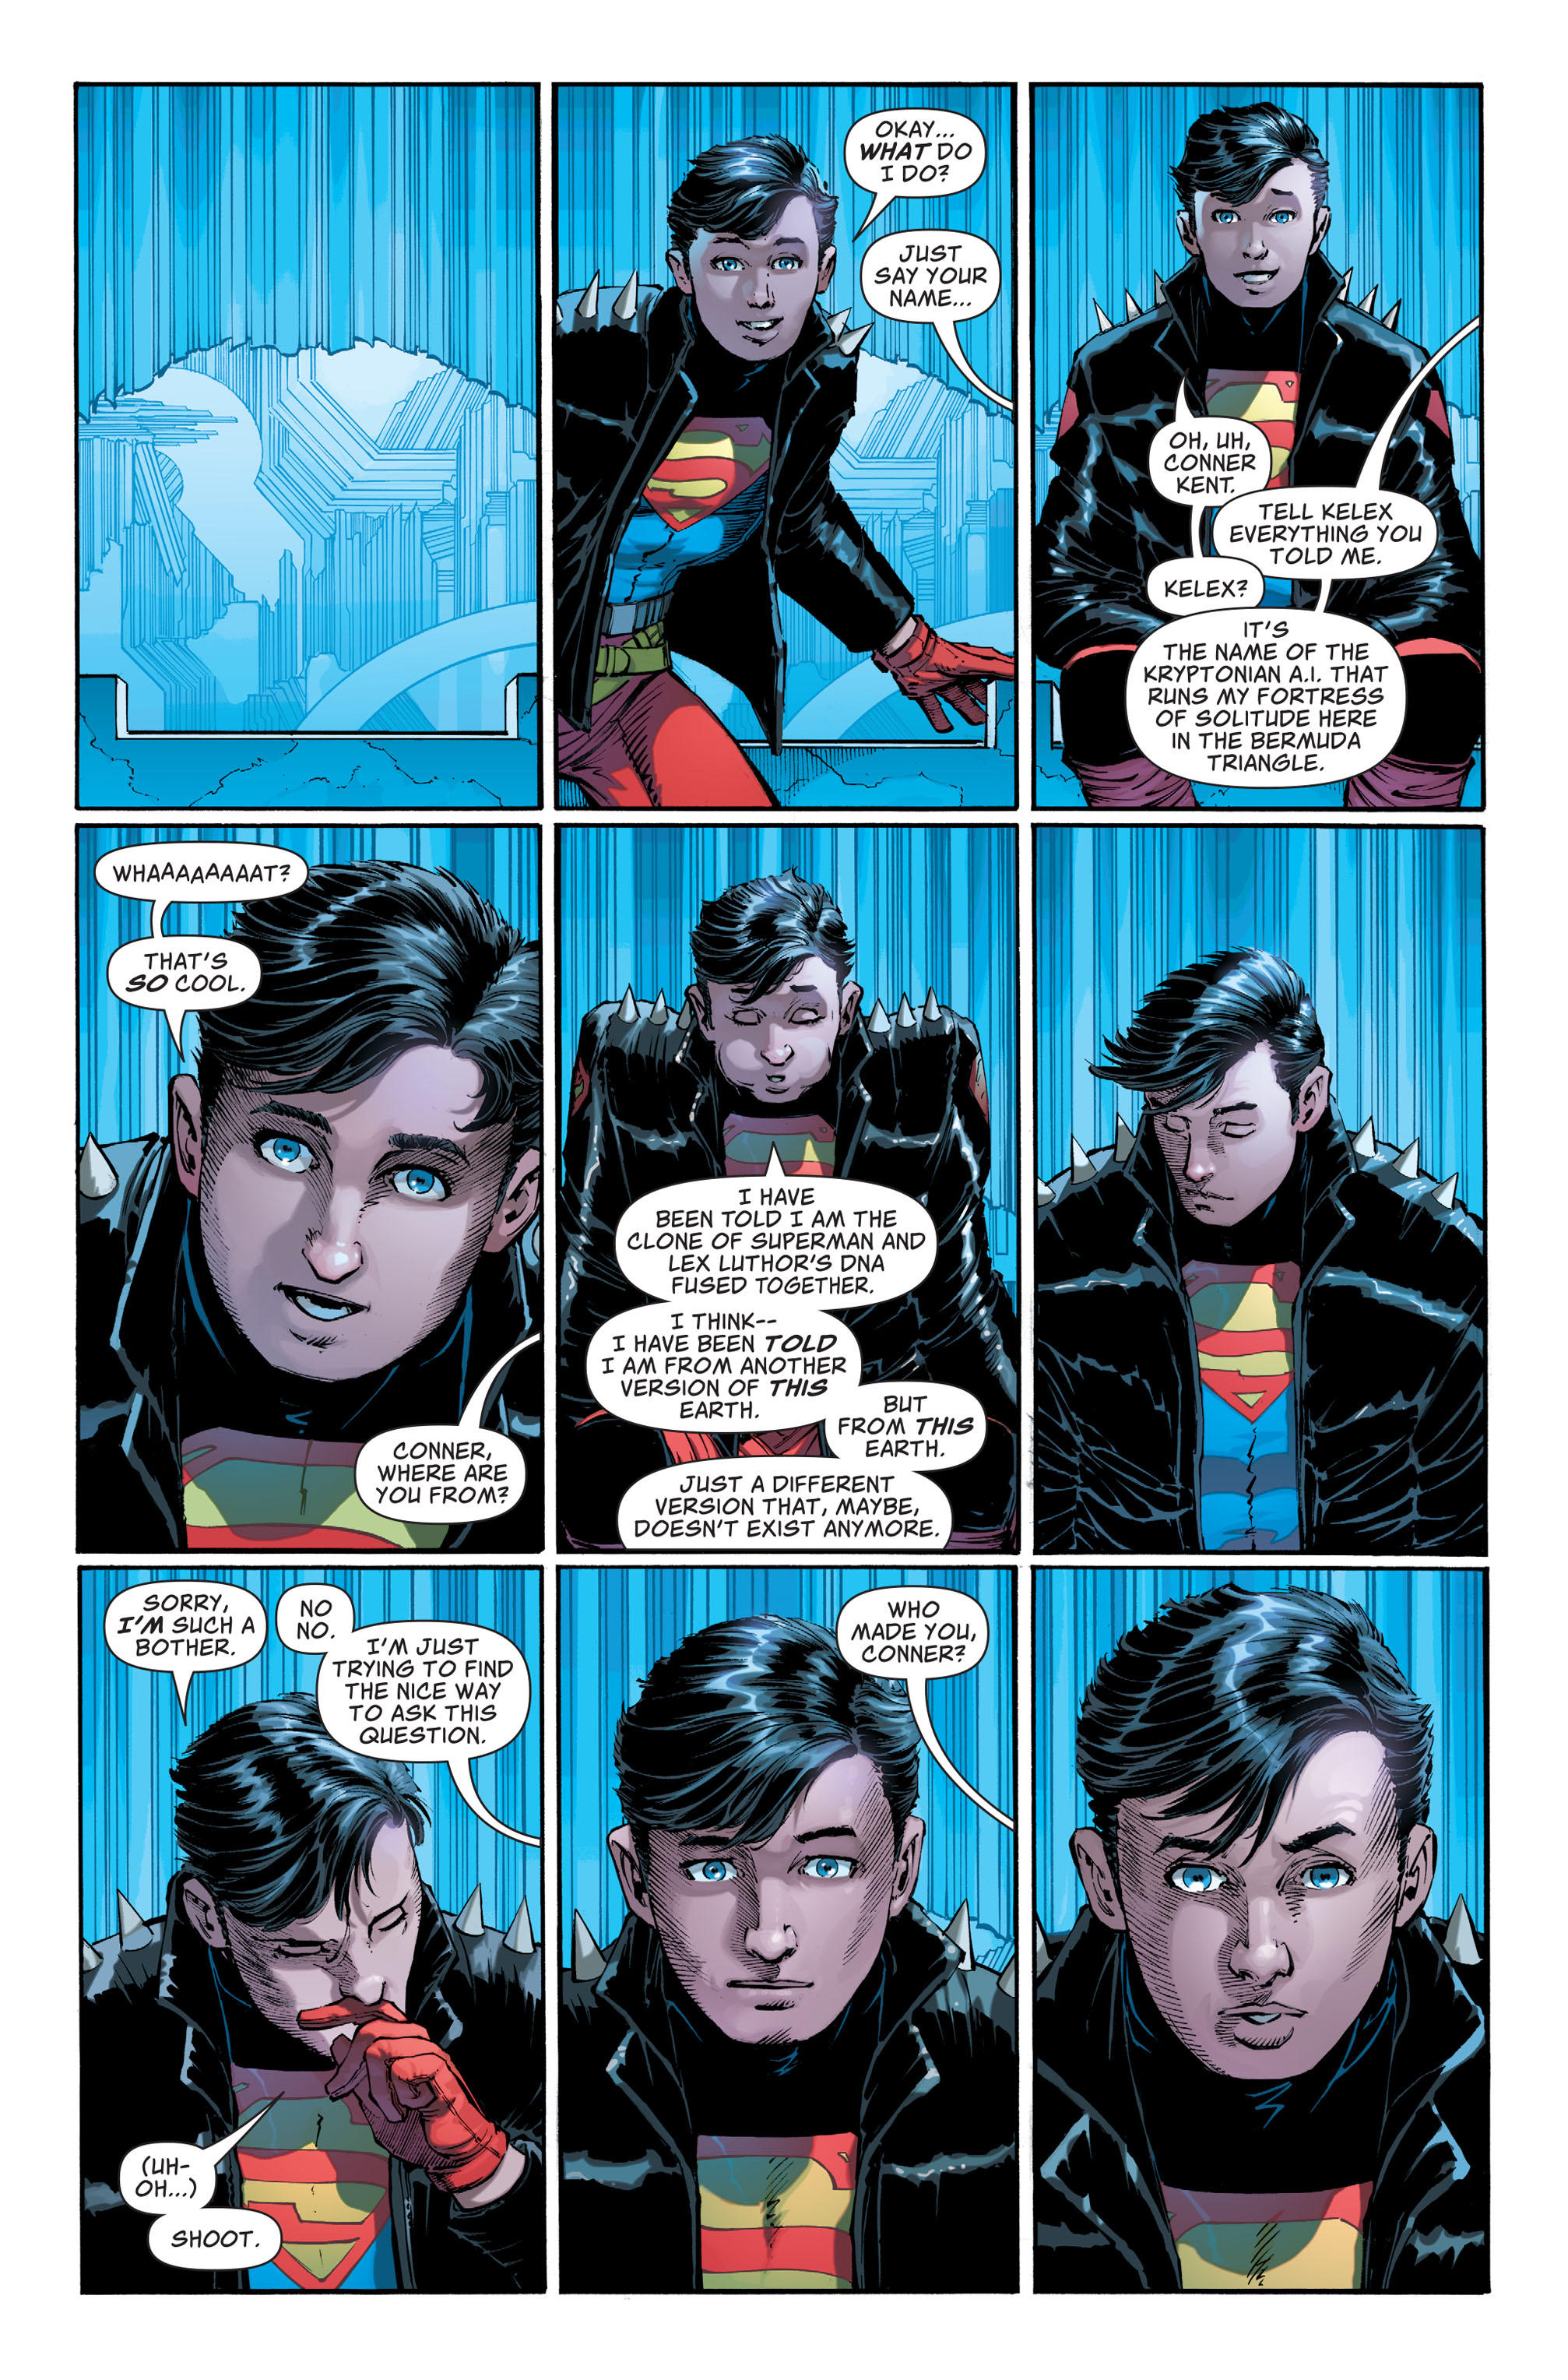 Action Comics (2016-): Chapter 1022 - Page 3